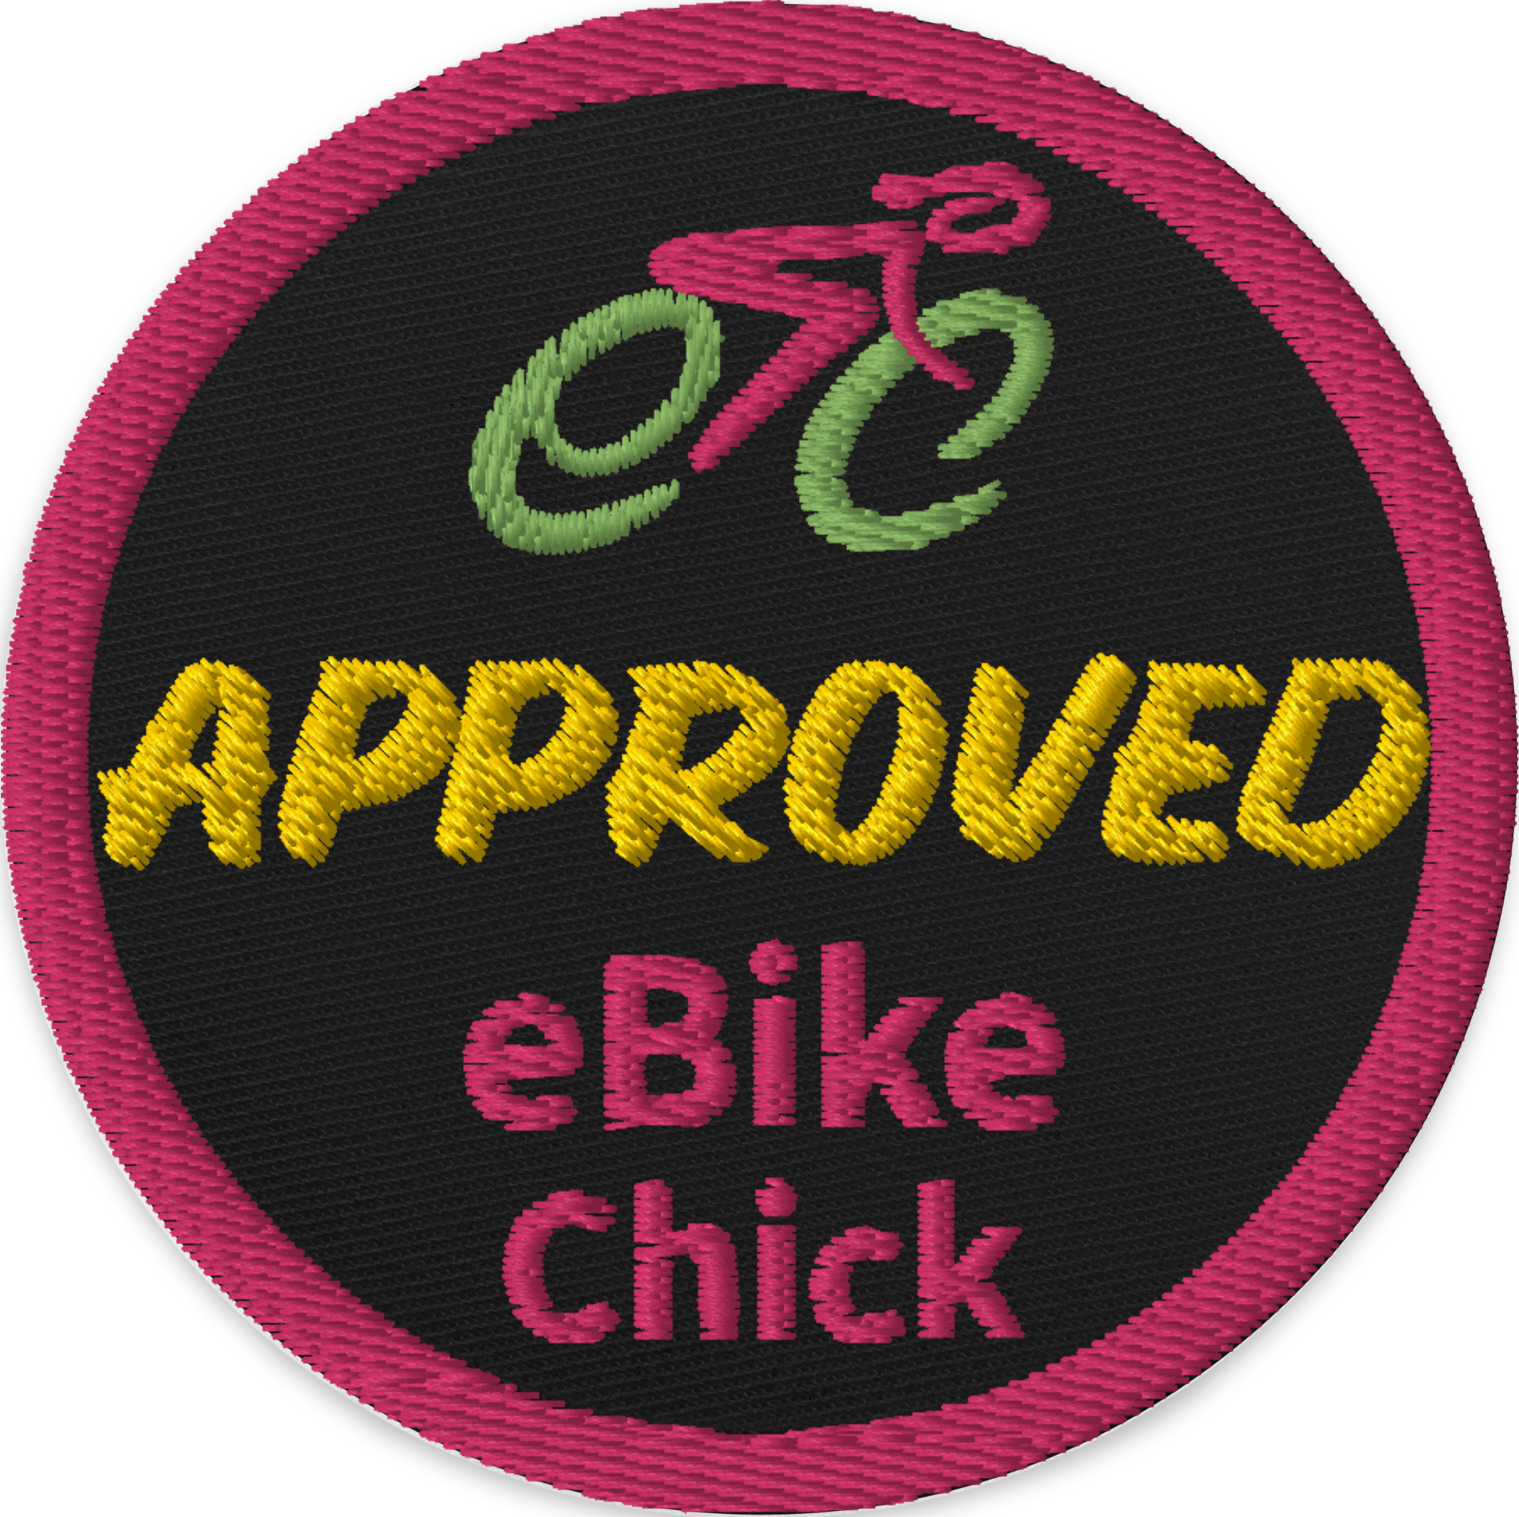 eBike Chick Approved official patch